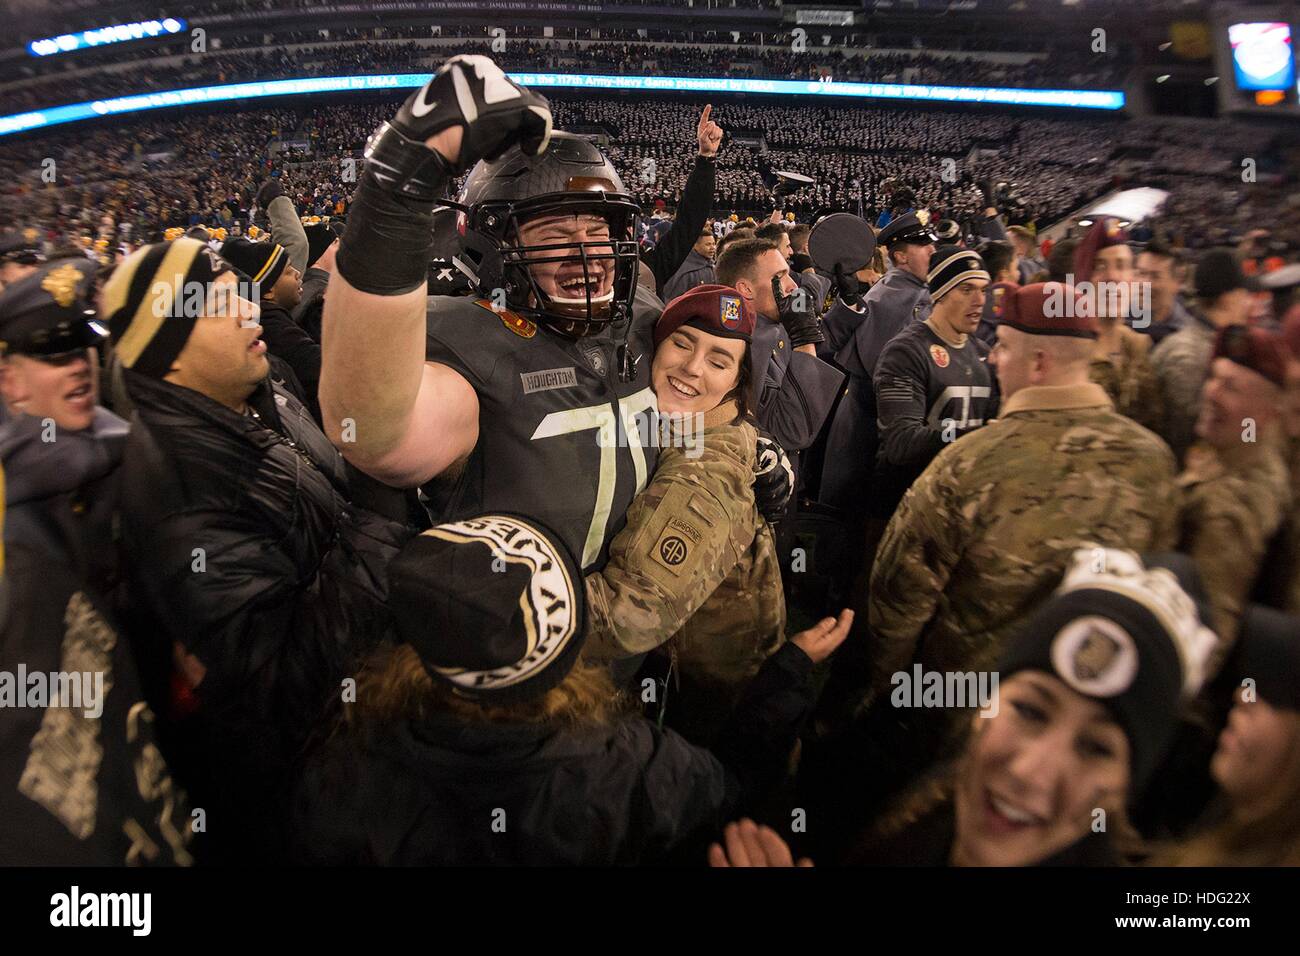 Army West Point football player Mike Houghton celebrates after winning the 117th Army Navy Game at M&T Bank Stadium December 10, 2016 in Baltimore, Maryland. Army defeated the U.S. Naval Academy 21-17 snapping their 14-year losing streak. Stock Photo